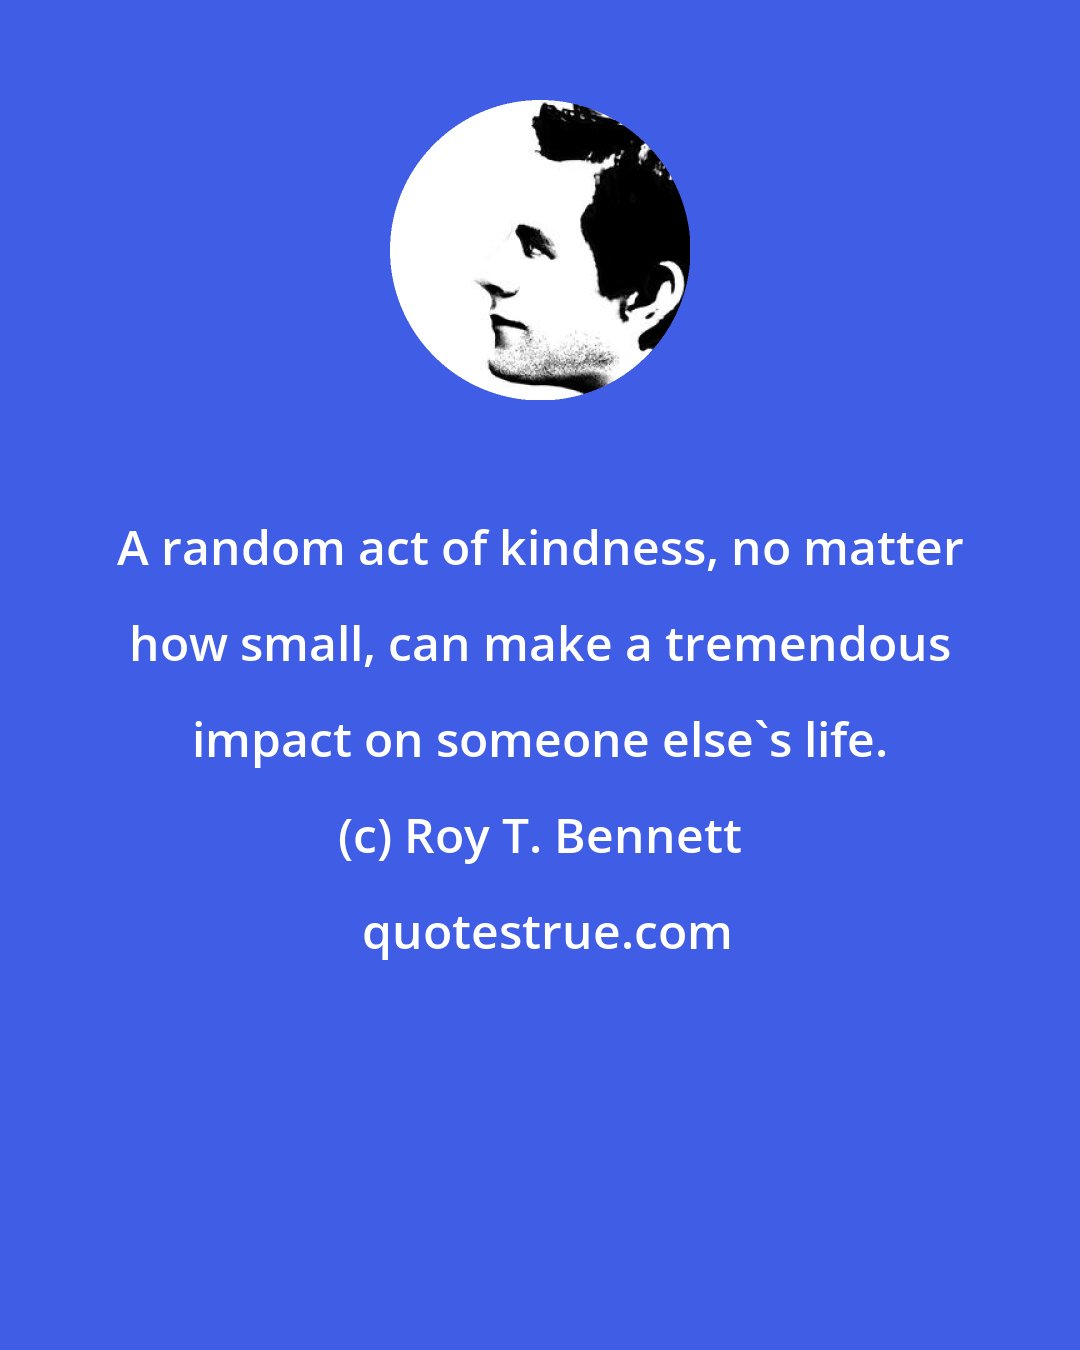 Roy T. Bennett: A random act of kindness, no matter how small, can make a tremendous impact on someone else's life.